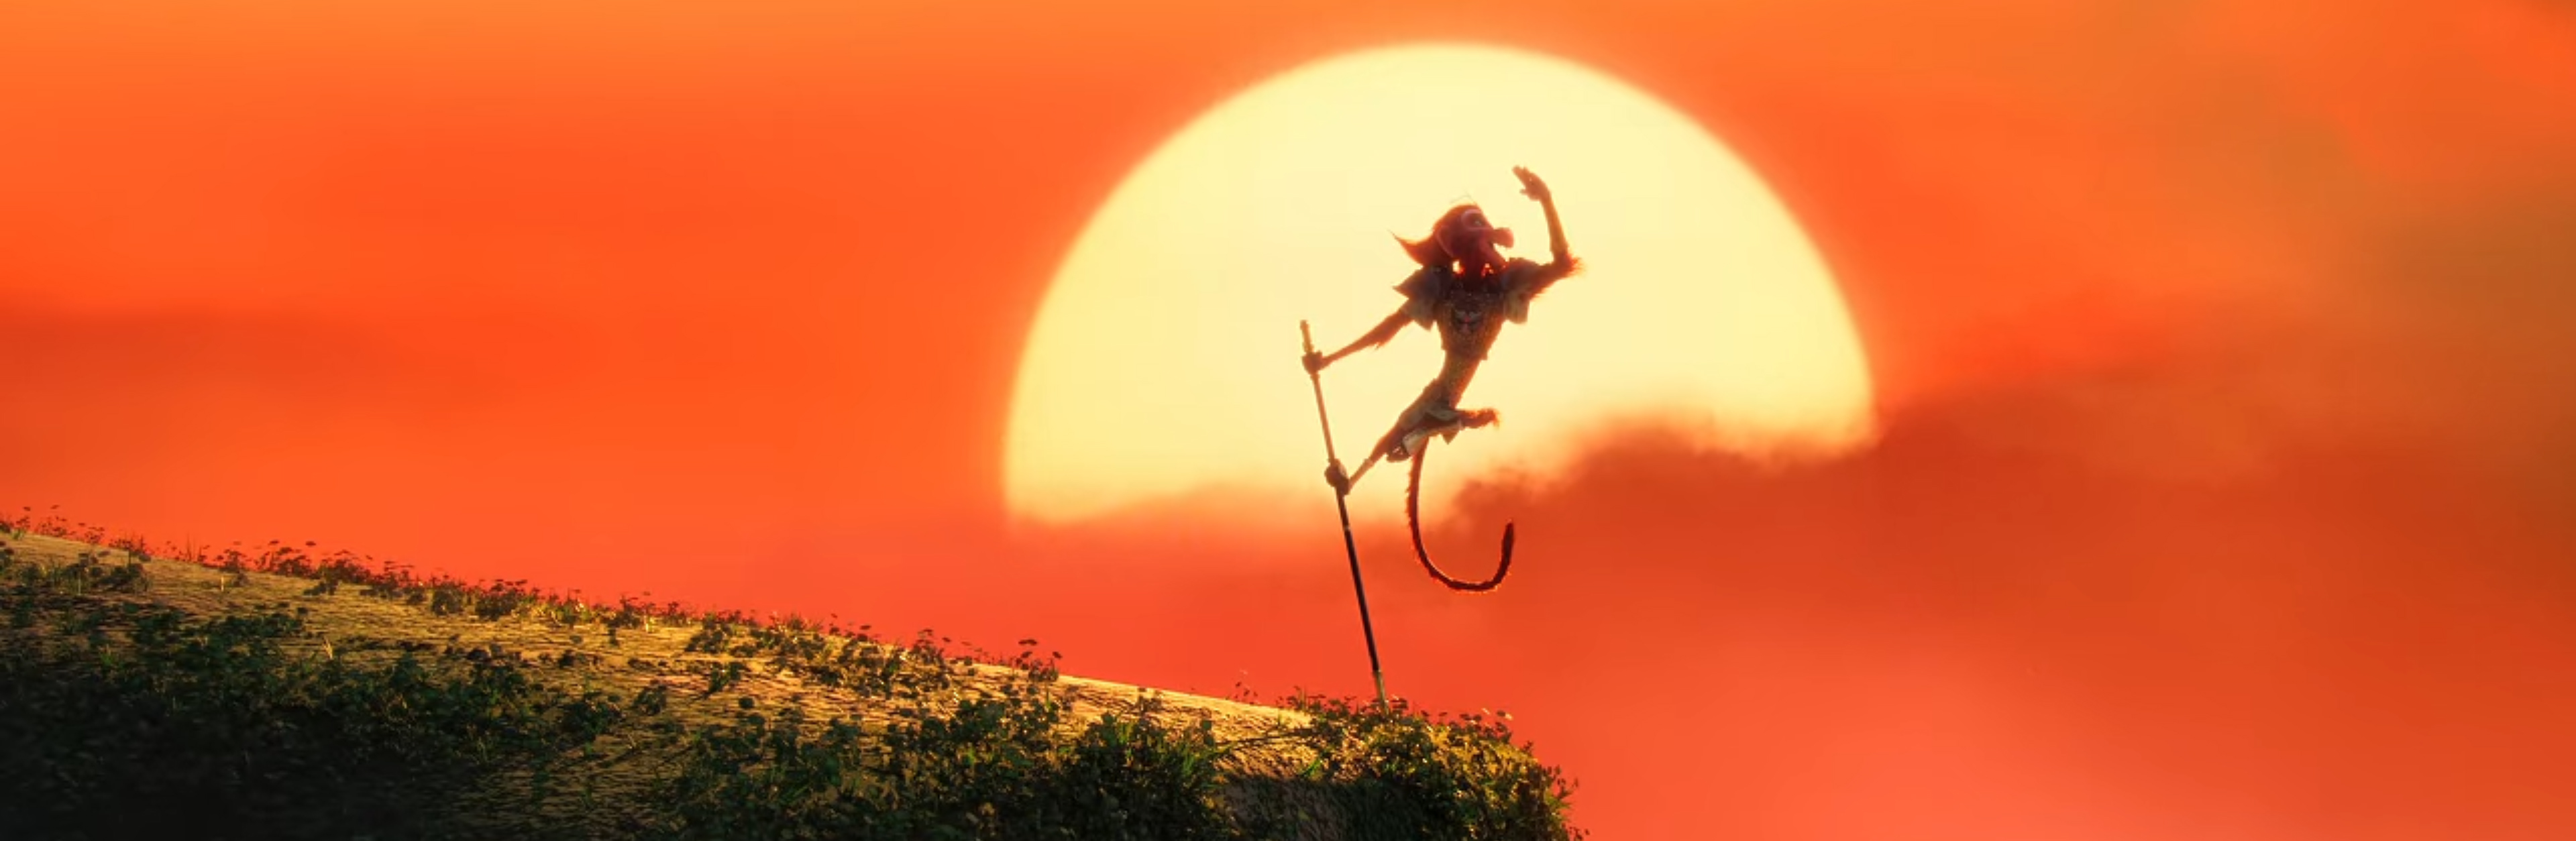 The Monkey King poses in front of a setting sun.